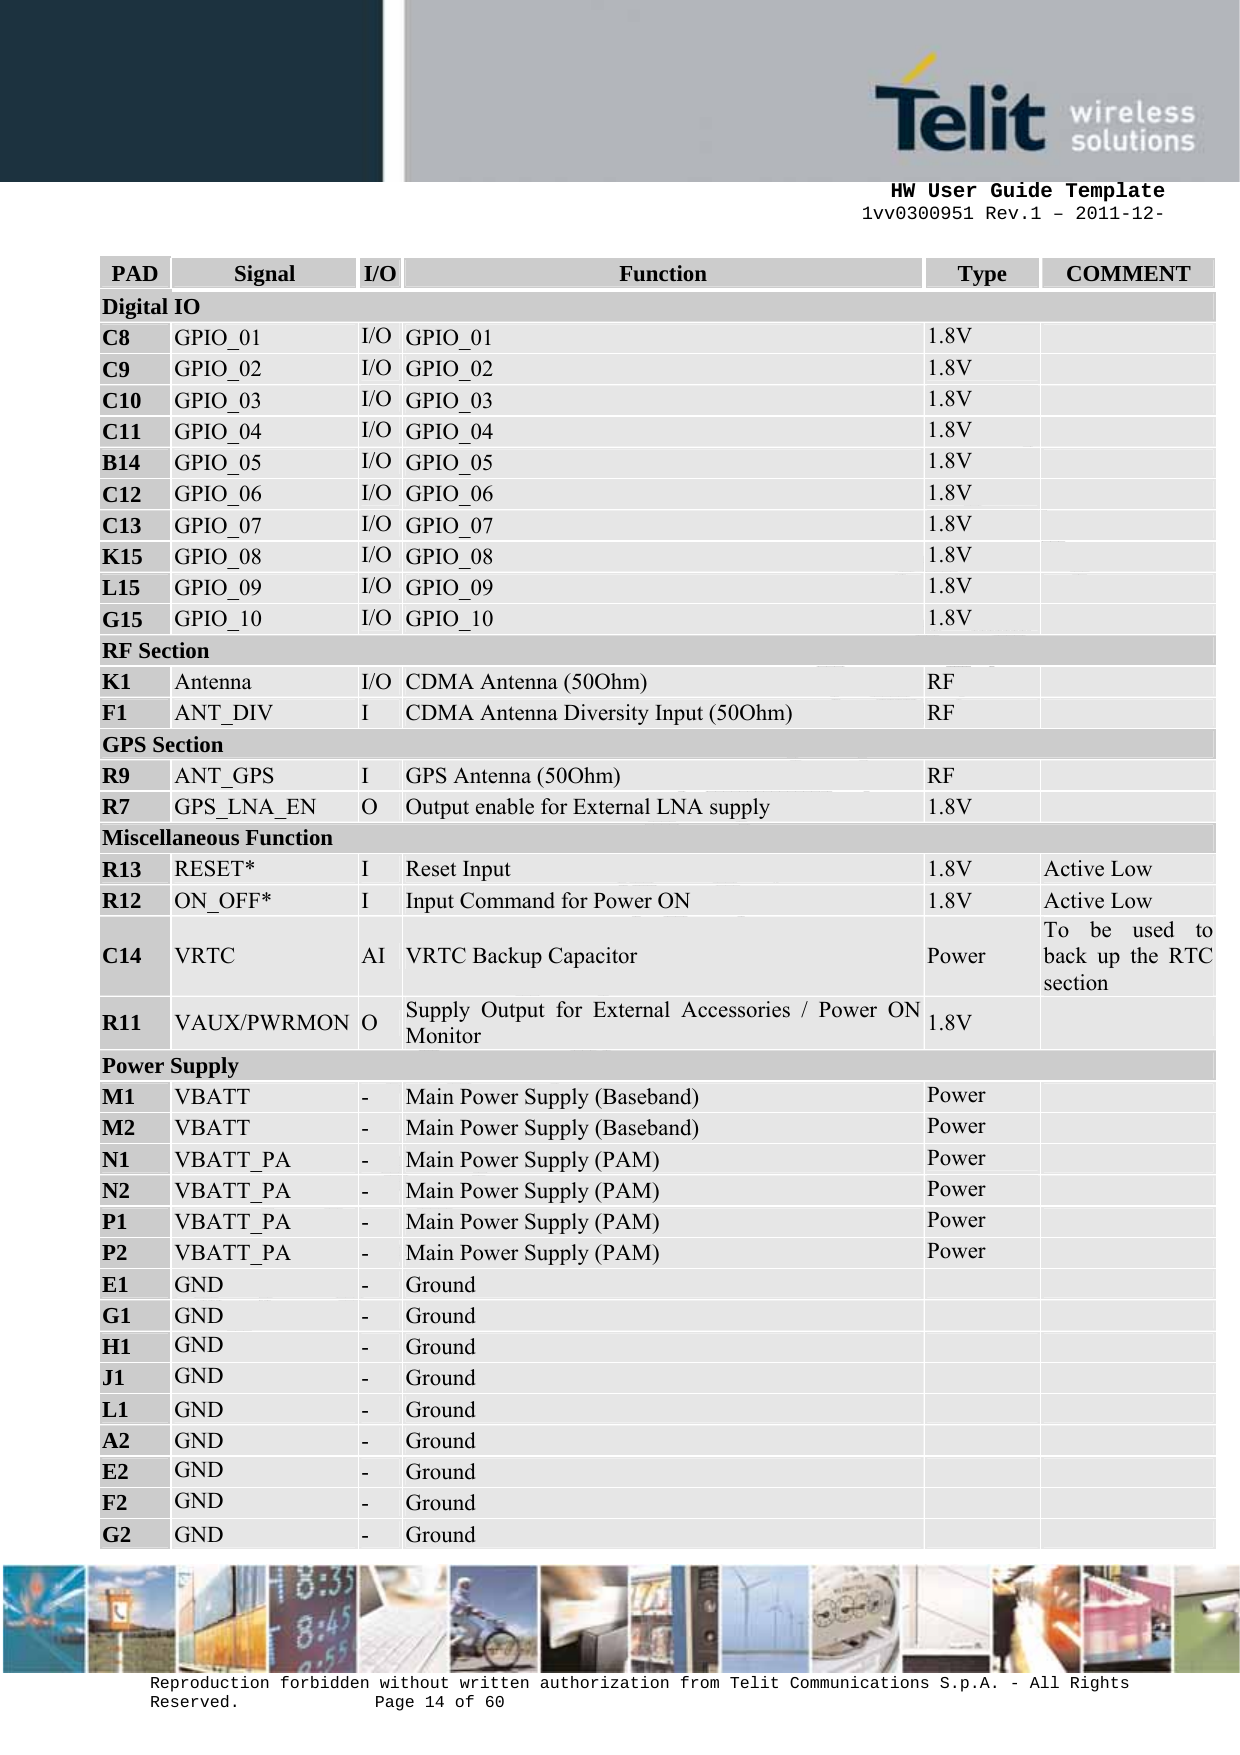      HW User Guide Template 1vv0300951 Rev.1 – 2011-12-  Reproduction forbidden without written authorization from Telit Communications S.p.A. - All Rights Reserved.    Page 14 of 60                                                     PAD  Signal  I/O  Function  Type  COMMENT Digital IO C8  GPIO_01  I/O  GPIO_01  1.8V   C9  GPIO_02  I/O  GPIO_02  1.8V   C10  GPIO_03  I/O  GPIO_03  1.8V   C11  GPIO_04  I/O  GPIO_04  1.8V   B14  GPIO_05  I/O  GPIO_05  1.8V   C12  GPIO_06  I/O  GPIO_06  1.8V   C13  GPIO_07  I/O  GPIO_07  1.8V   K15  GPIO_08  I/O  GPIO_08  1.8V   L15  GPIO_09  I/O  GPIO_09  1.8V   G15  GPIO_10  I/O  GPIO_10  1.8V   RF Section K1  Antenna  I/O  CDMA Antenna (50Ohm)  RF   F1  ANT_DIV  I  CDMA Antenna Diversity Input (50Ohm)  RF   GPS Section R9  ANT_GPS  I  GPS Antenna (50Ohm)  RF   R7  GPS_LNA_EN  O  Output enable for External LNA supply  1.8V   Miscellaneous Function R13  RESET*  I  Reset Input  1.8V  Active Low R12  ON_OFF*  I  Input Command for Power ON  1.8V  Active Low C14  VRTC  AI  VRTC Backup Capacitor  Power To be used to back up the RTC section R11  VAUX/PWRMON  O  Supply Output for External Accessories / Power ON Monitor  1.8V   Power Supply M1  VBATT  -  Main Power Supply (Baseband)  Power   M2  VBATT  -  Main Power Supply (Baseband)  Power   N1  VBATT_PA  -  Main Power Supply (PAM)  Power   N2  VBATT_PA  -  Main Power Supply (PAM)  Power   P1  VBATT_PA  -  Main Power Supply (PAM)  Power   P2  VBATT_PA  -  Main Power Supply (PAM)  Power   E1  GND  -  Ground     G1  GND  -  Ground     H1  GND  -  Ground     J1  GND  -  Ground     L1  GND  -  Ground     A2  GND  -  Ground     E2  GND  -  Ground     F2  GND  -  Ground     G2  GND  -  Ground     